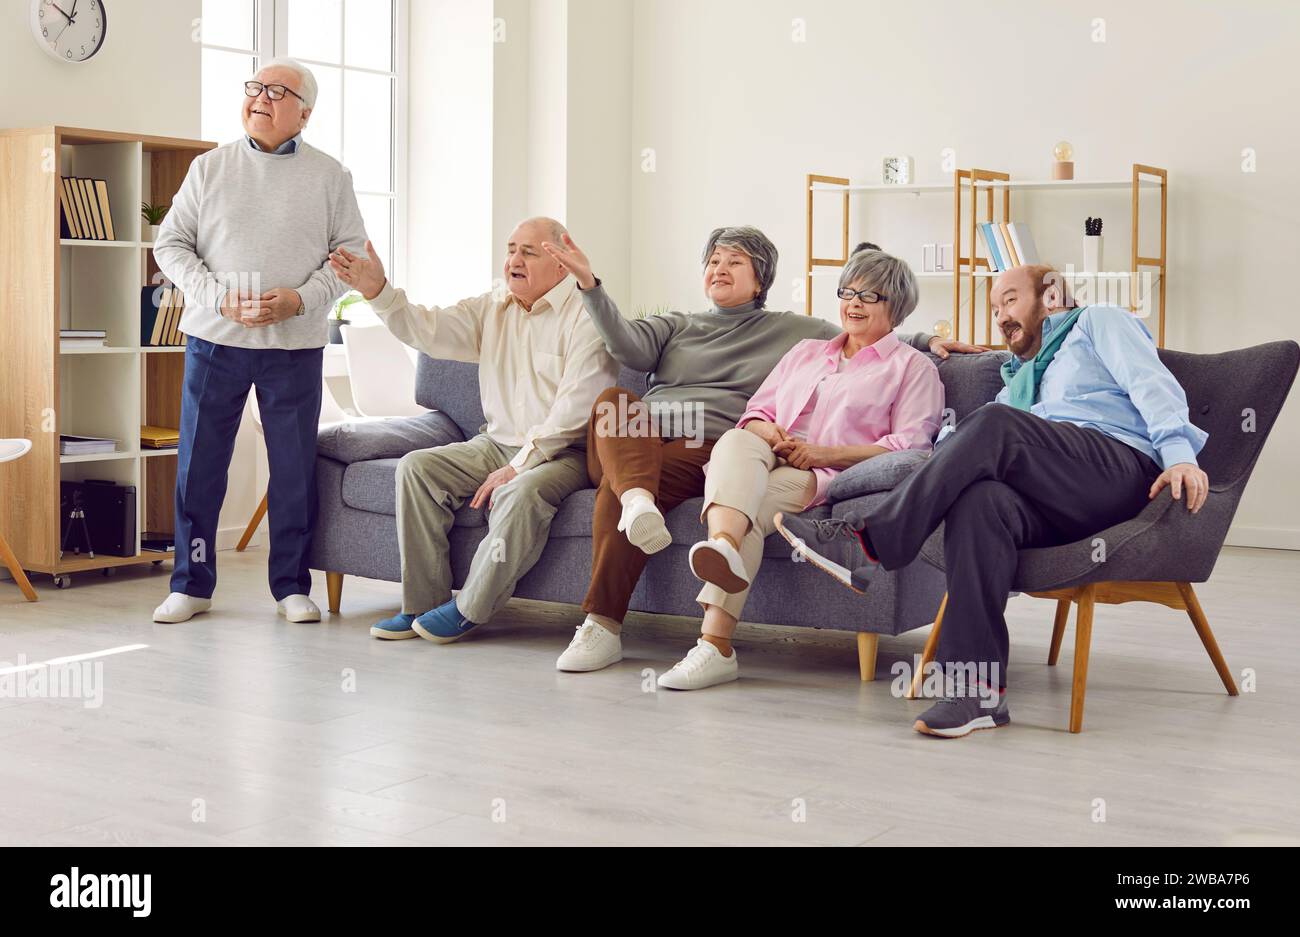 Group of happy senior people sitting on couch and watching sports match on television Stock Photo